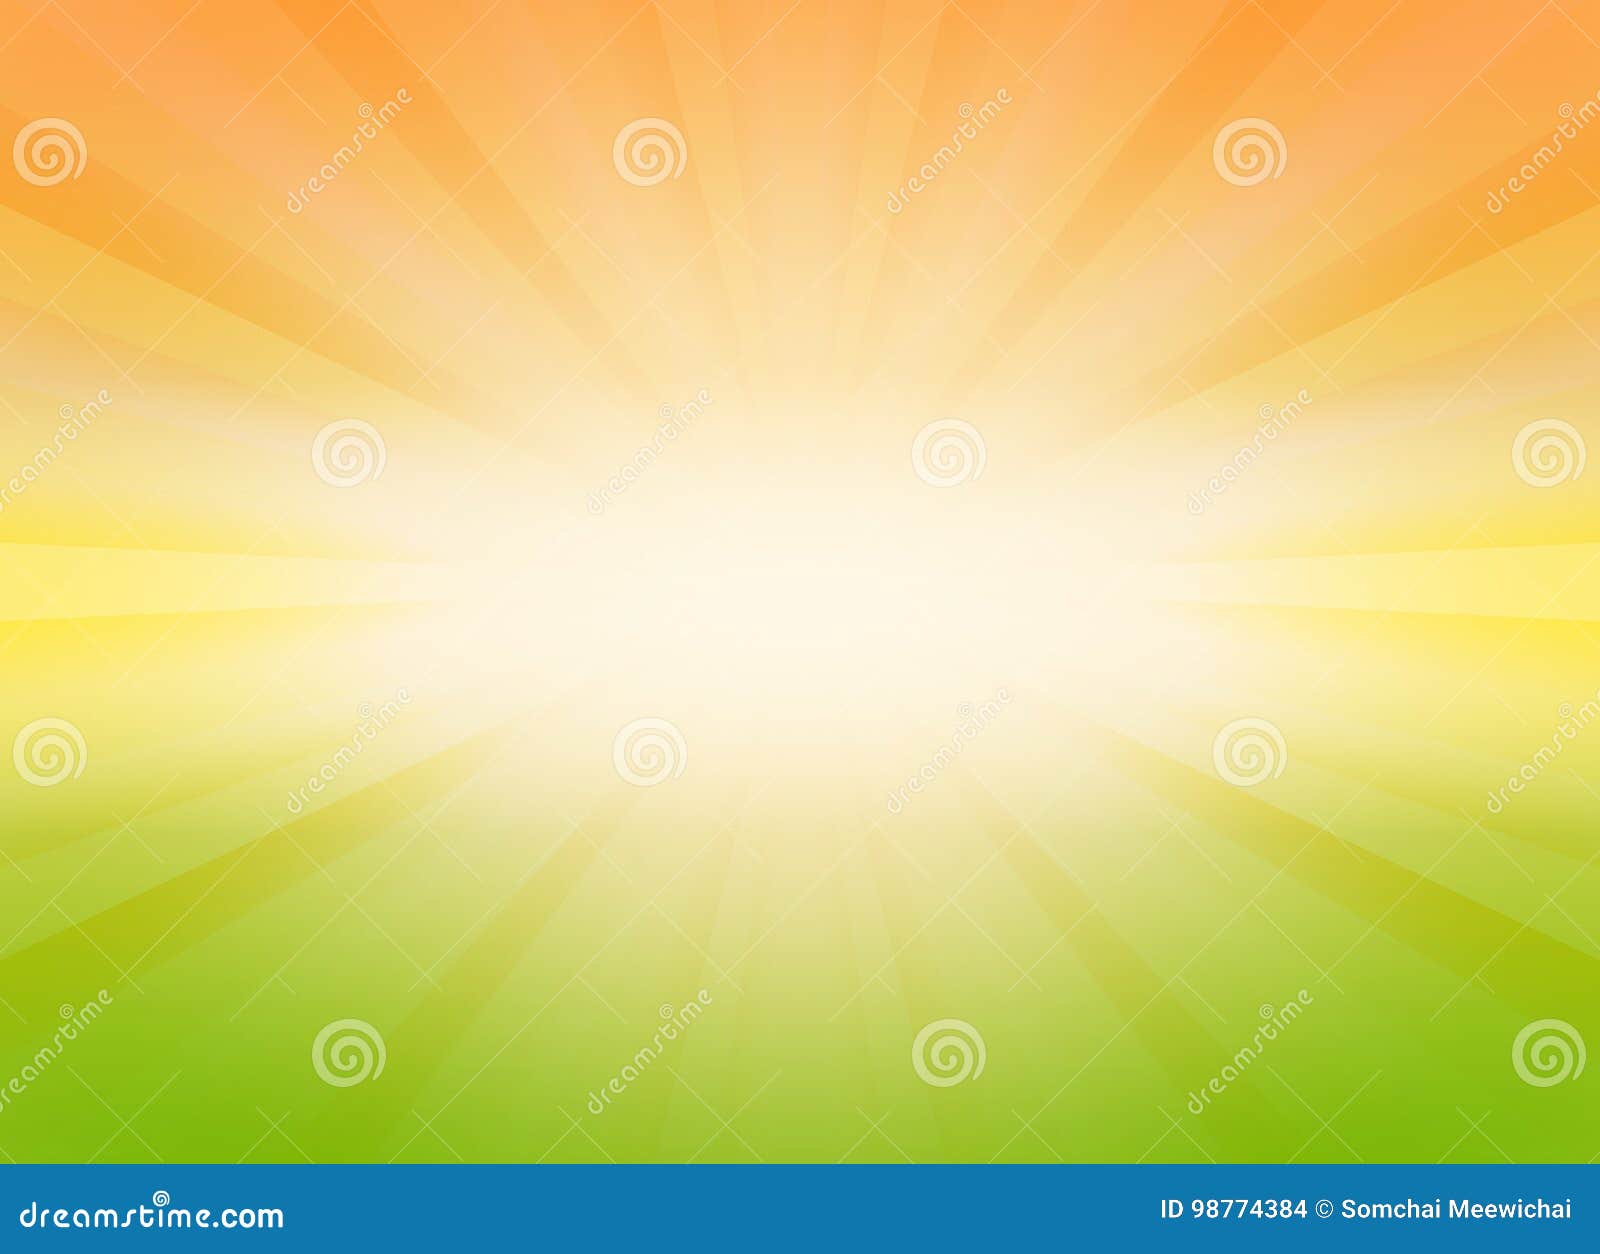 Burst Background for Presentation with Green and Yellow Mix Color Stock  Illustration - Illustration of landscape, copy: 98774384